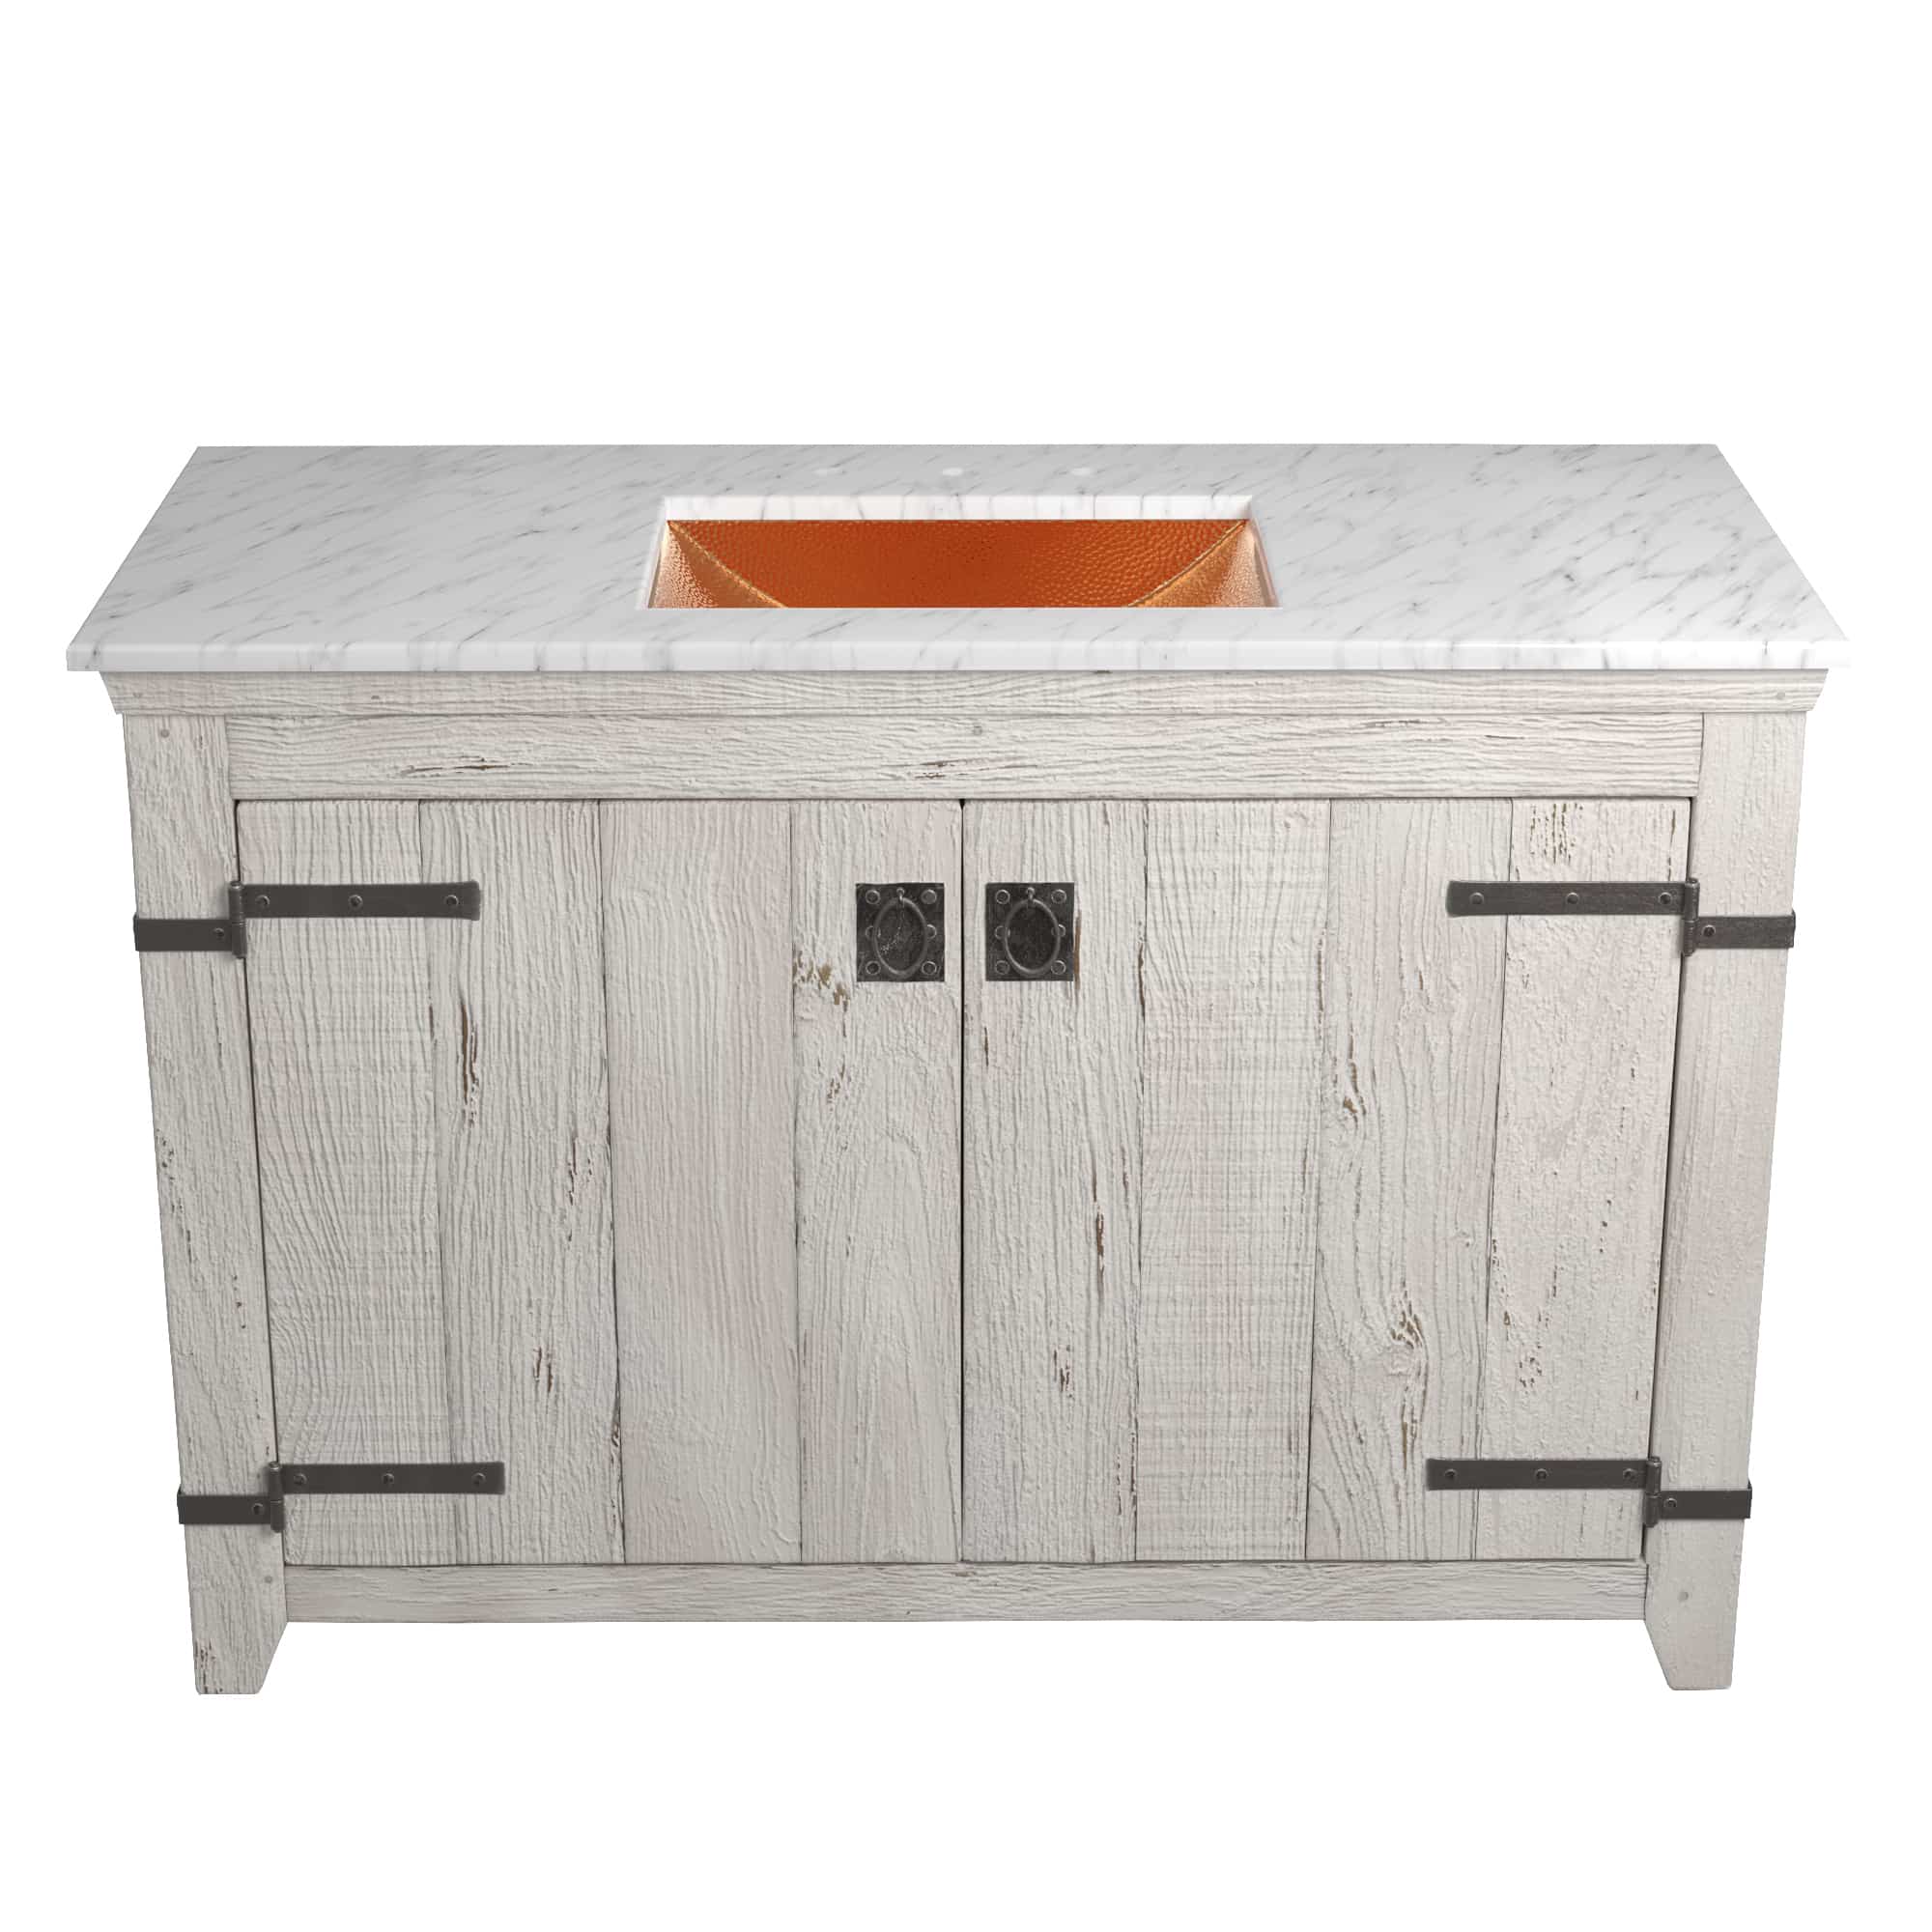 Native Trails 48" Americana Vanity in Whitewash with Carrara Marble Top and Avila in Polished Copper, 8" Widespread Faucet Holes, BND48-VB-CT-CP-010